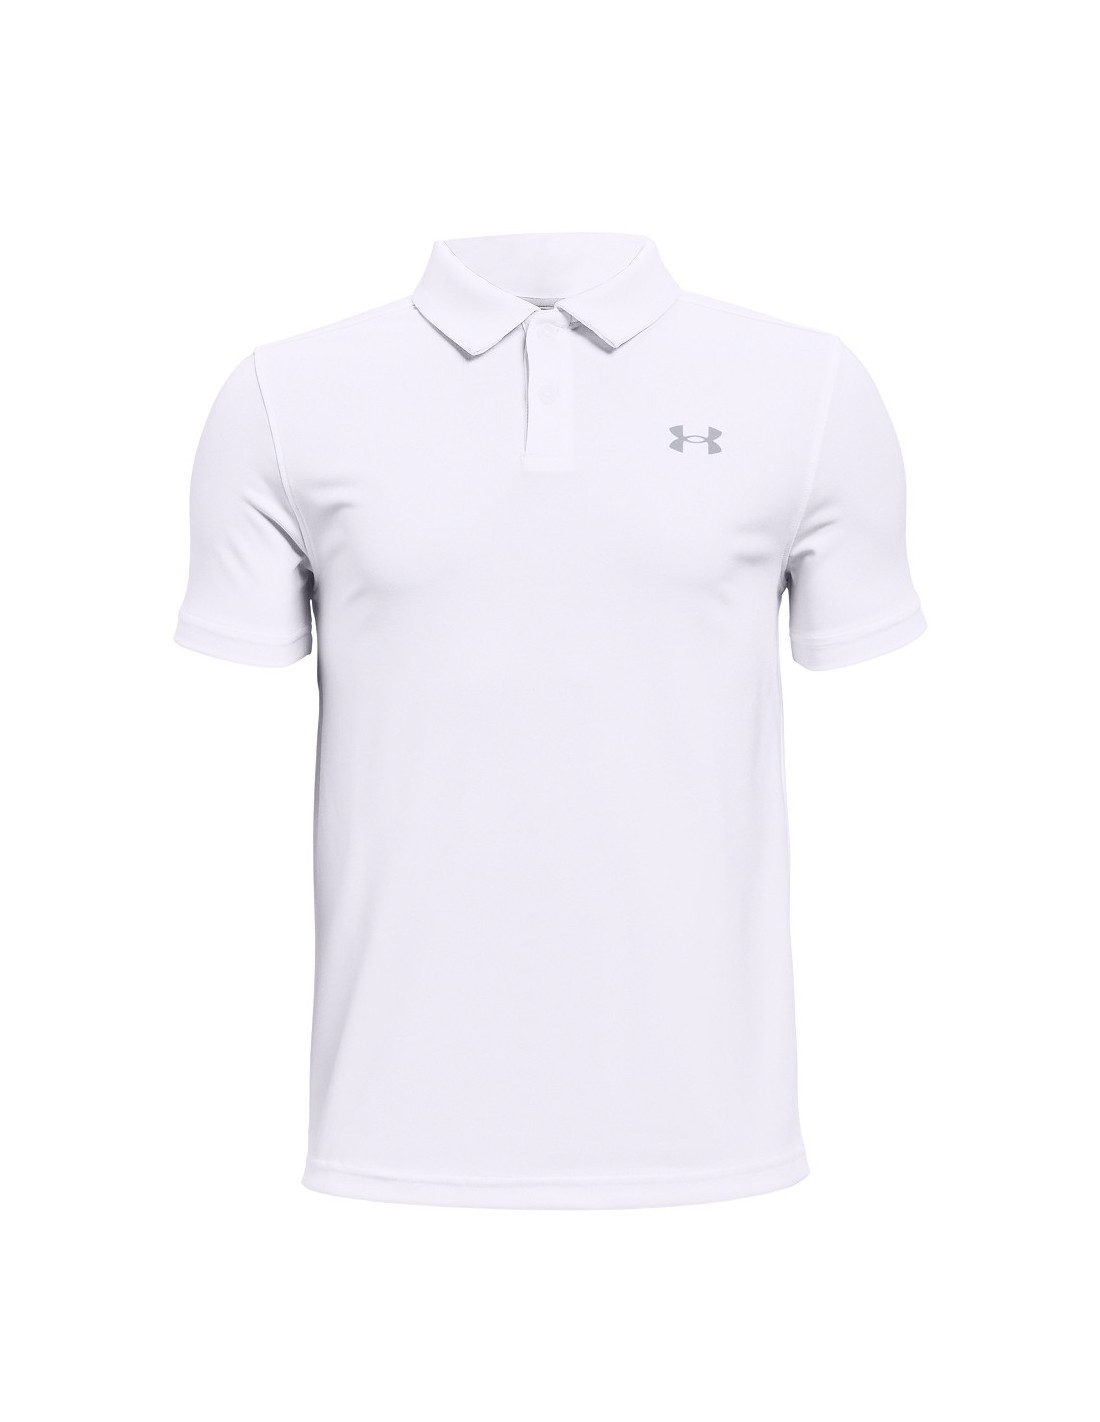 Montgomery productos quimicos feo Under Armour Performance 1364425 golf Polo shirt